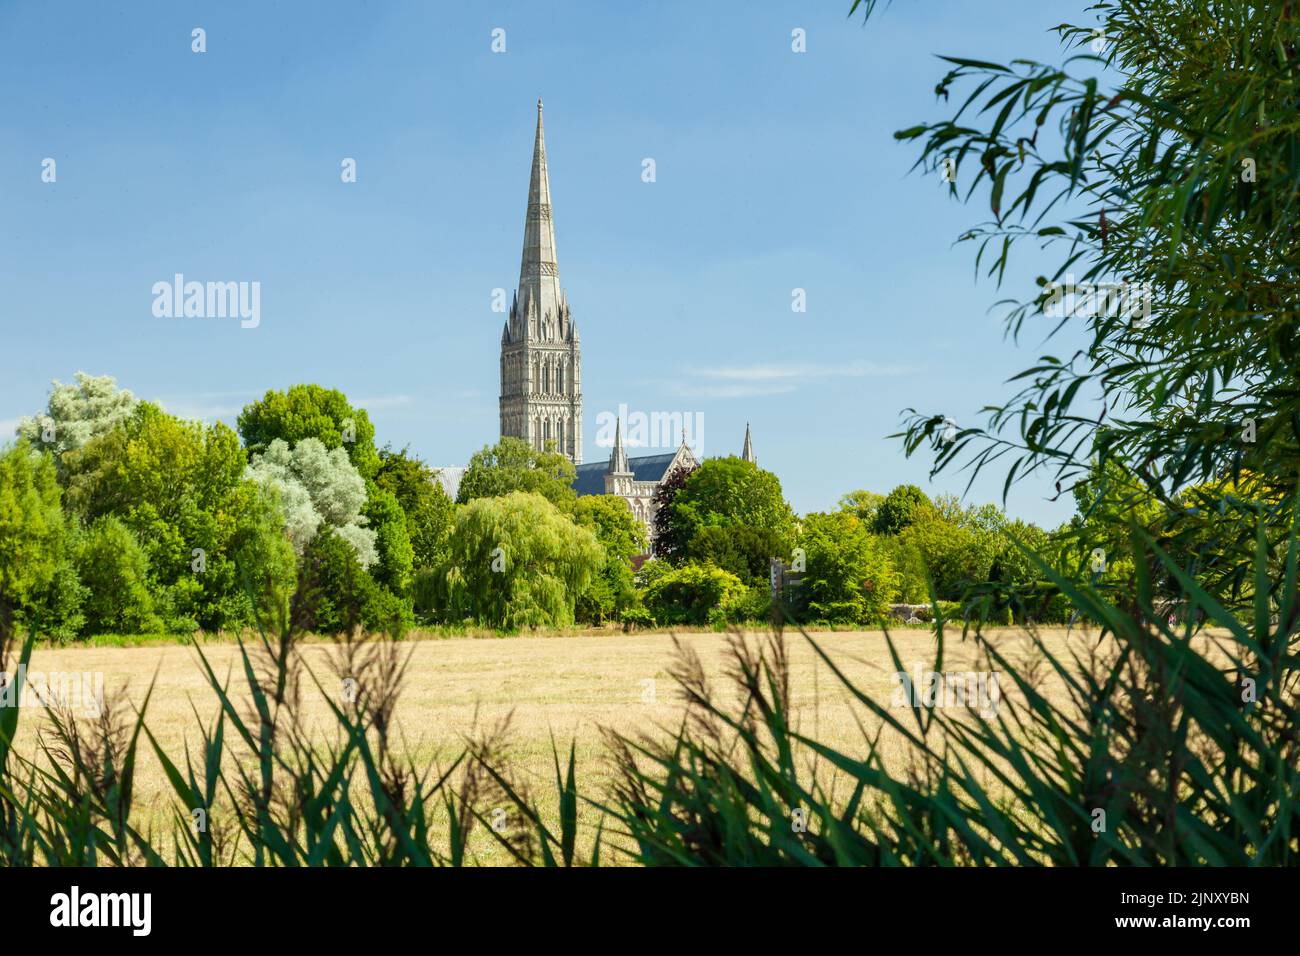 Summer afternoon at Salisbury Cathedral, Wiltshire, England. Stock Photo